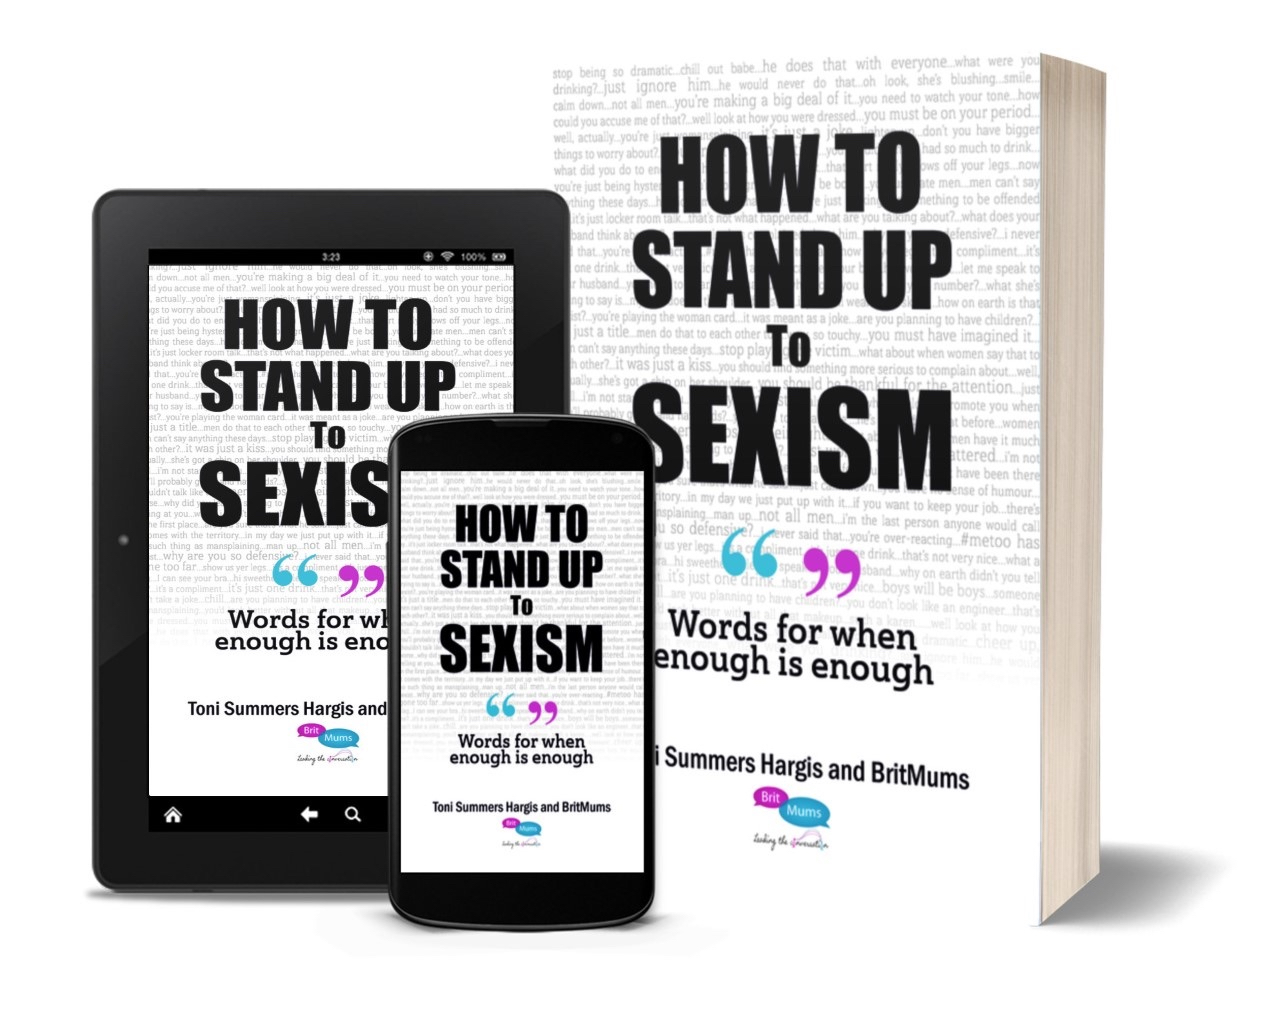 How to stand up to sexism book in print, tablet and mobile phone format